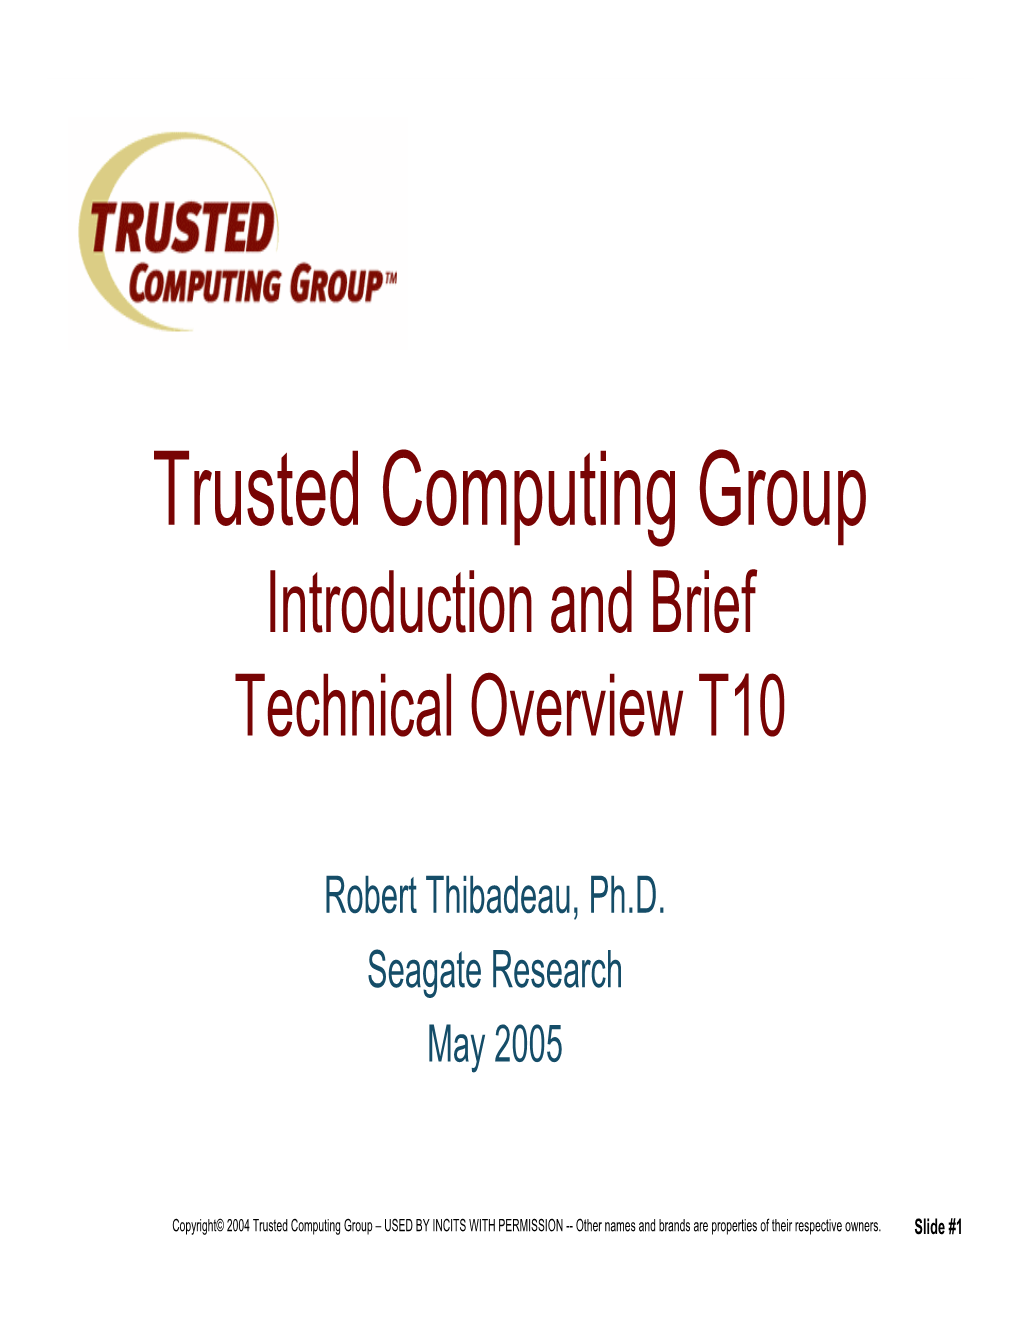 Trusted Computing Group Introduction and Brief Technical Overview T10